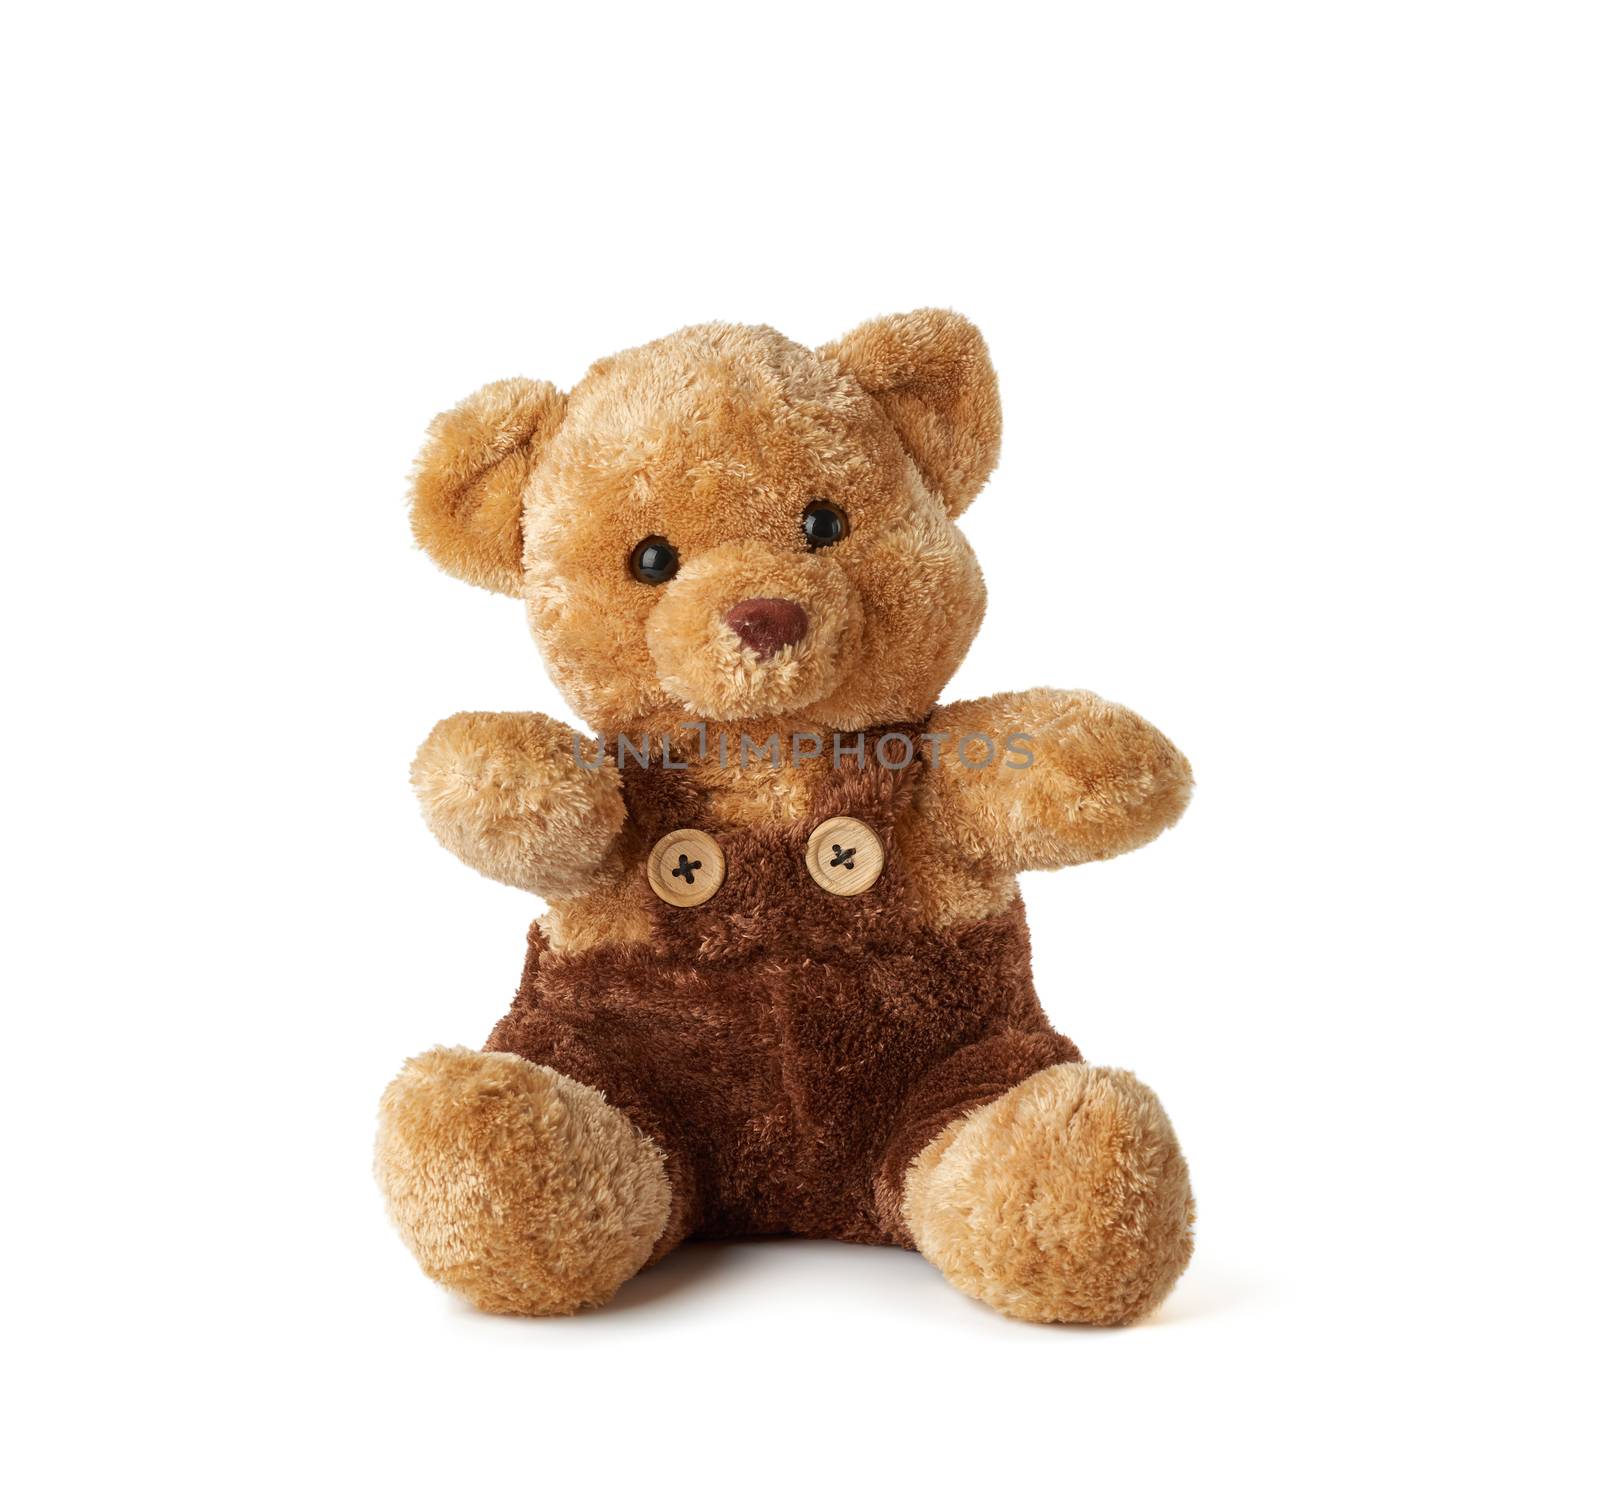 brown teddy bear sitting on a white background, toy is isolated